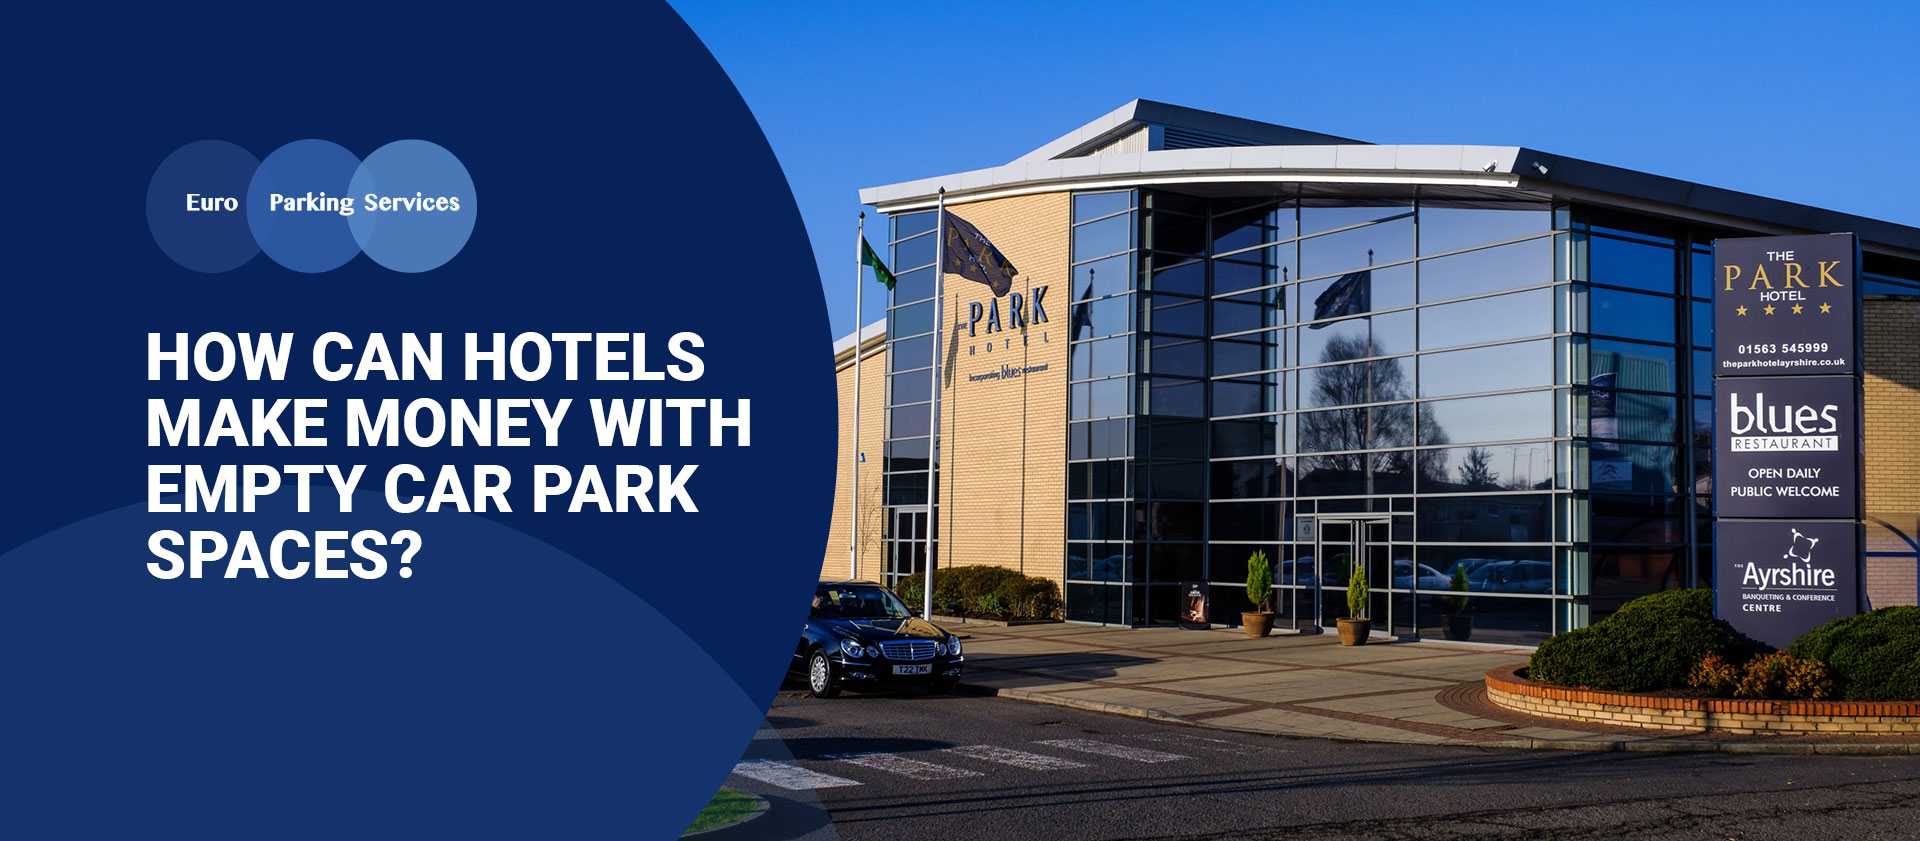 How Can Hotels Make Money With Empty Car Park Spaces